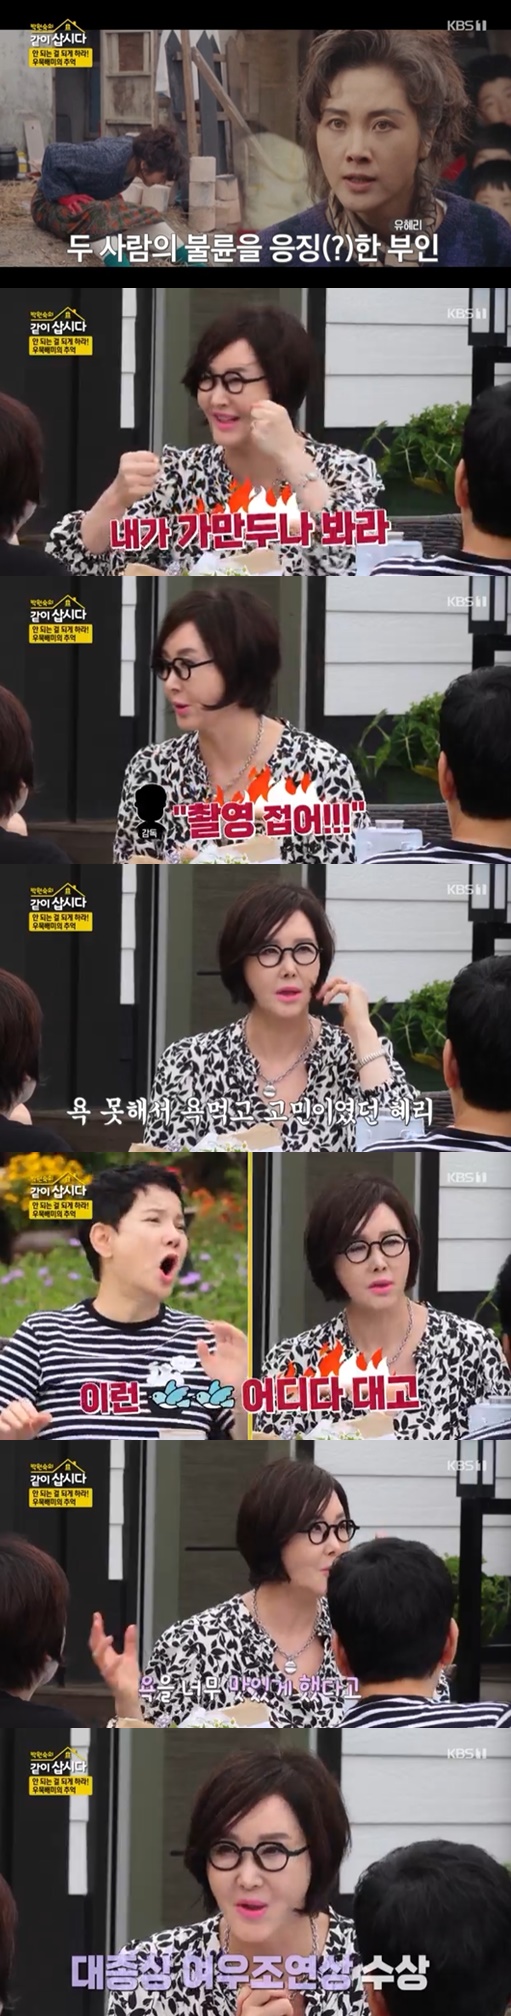 Lets live together, Yoo Hye-ri said of the divorce experience.Actor Yoo Hye-ri appeared on KBS 1TV Park Won-sook, which was broadcasted on the morning of the 13th.Were the same horse lady, but we didnt know each other very well. We came back from the U.S. and started playing. Thats when I met Hye-ri, Ahn said.Yoo Hye-ri has been a model since college and made her debut in the 1988 movie Paris. Yoo Hye-ri said, I actually did a CF model and a fashion model. I did it because I was paid a lot of money.He recalled, At that time, I didnt know about movies or acting. Once I got into an accident, I got into a fix. I got into a big accident. I signed a contract. Later, my parents found out and smashed it.Yoo Hye-ri said, Just before I signed the contract and left for Paris, Father knew. Father saw the script, was shocked, tore up the script, and had a storm.My brother and brother helped me, so I went over. When Father broke something, my brother broke two. Father asked me to bring all the schedules, so I gave my schedule and got permission. Im an actor and I can do it. I asked for a high-level scene. Of course, it was hard because I was new to it, but after I did it, I realized what I was in. The movie was also somewhat popular.I was playing at the theater in earnest because the seniors who play should transform. Yoo Hye-ri won the Dae Jong-Sang Best Supporting Actress Award for the film The Love of Woomukbaemi.Yoo Hye-ri said, Then I received the script for the movie Woomukbaemis Love. Park Jung-hoon came out as my husband, and Choi Myung-gil came out as my husbands infidel.He said, I swear and kick a lot, but I didnt swear, so I was worried. The director said, Is that all you can do? Stop filming. My senior taught me that the easiest thing to do is swear. I practiced swearing for a month or two and kicking.I was praised by the director, and he gave me a supporting actress for Dae Jong Sang, saying, I made it so delicious.After winning the award, I received a love call from the show and started broadcasting in earnest. I became a troubleshooter, a beater, and a mother-in-law.Yoo Hye-ri said, I divorced 20 years ago. I have a medal. I owed it, but I paid it off.Yoo Hye-ri married fellow actor Lee Geun-hee in 1994 but divorced after a year and a half.I had four puppies and I let them go and I raised Cat. There are no babies. There are three Cats, it gives me joy, he added.Park Won-sook wondered, Are you beautiful, young, slim and capable, after one marriage?Yoo Hye-ri said, I tried many times. I was introduced a lot, but it was not easy. I saw that religion should be the same around me. Deaconesses arranged me to meet the elder.At first, I was pitiful, so I watched it together. It was once or twice, and every time I met, I took it out. I was in a bad mood. He said, I was married for about a year and a half or two years. My seniors said my life was a waste. I dated for about a year. At that time, I was more timid. Now Im good at talking when Im older, but I didnt want to come forward and didnt go to crowded places.I dont know about my ex-husband. I wasnt sitting on my hands either. I was busy. I worked hard and I think I could do three medals.As for the conditions of meeting a man, he said, Personality is important. I do not like to be too hot. I really hate the personality that goes back and forth in the morning and evening. I want to be a consistent and relaxed person. I do not like a person who is too outgoing.They are good for others, but they are neglected by their aides. Photo: KBS 1TV broadcast screen